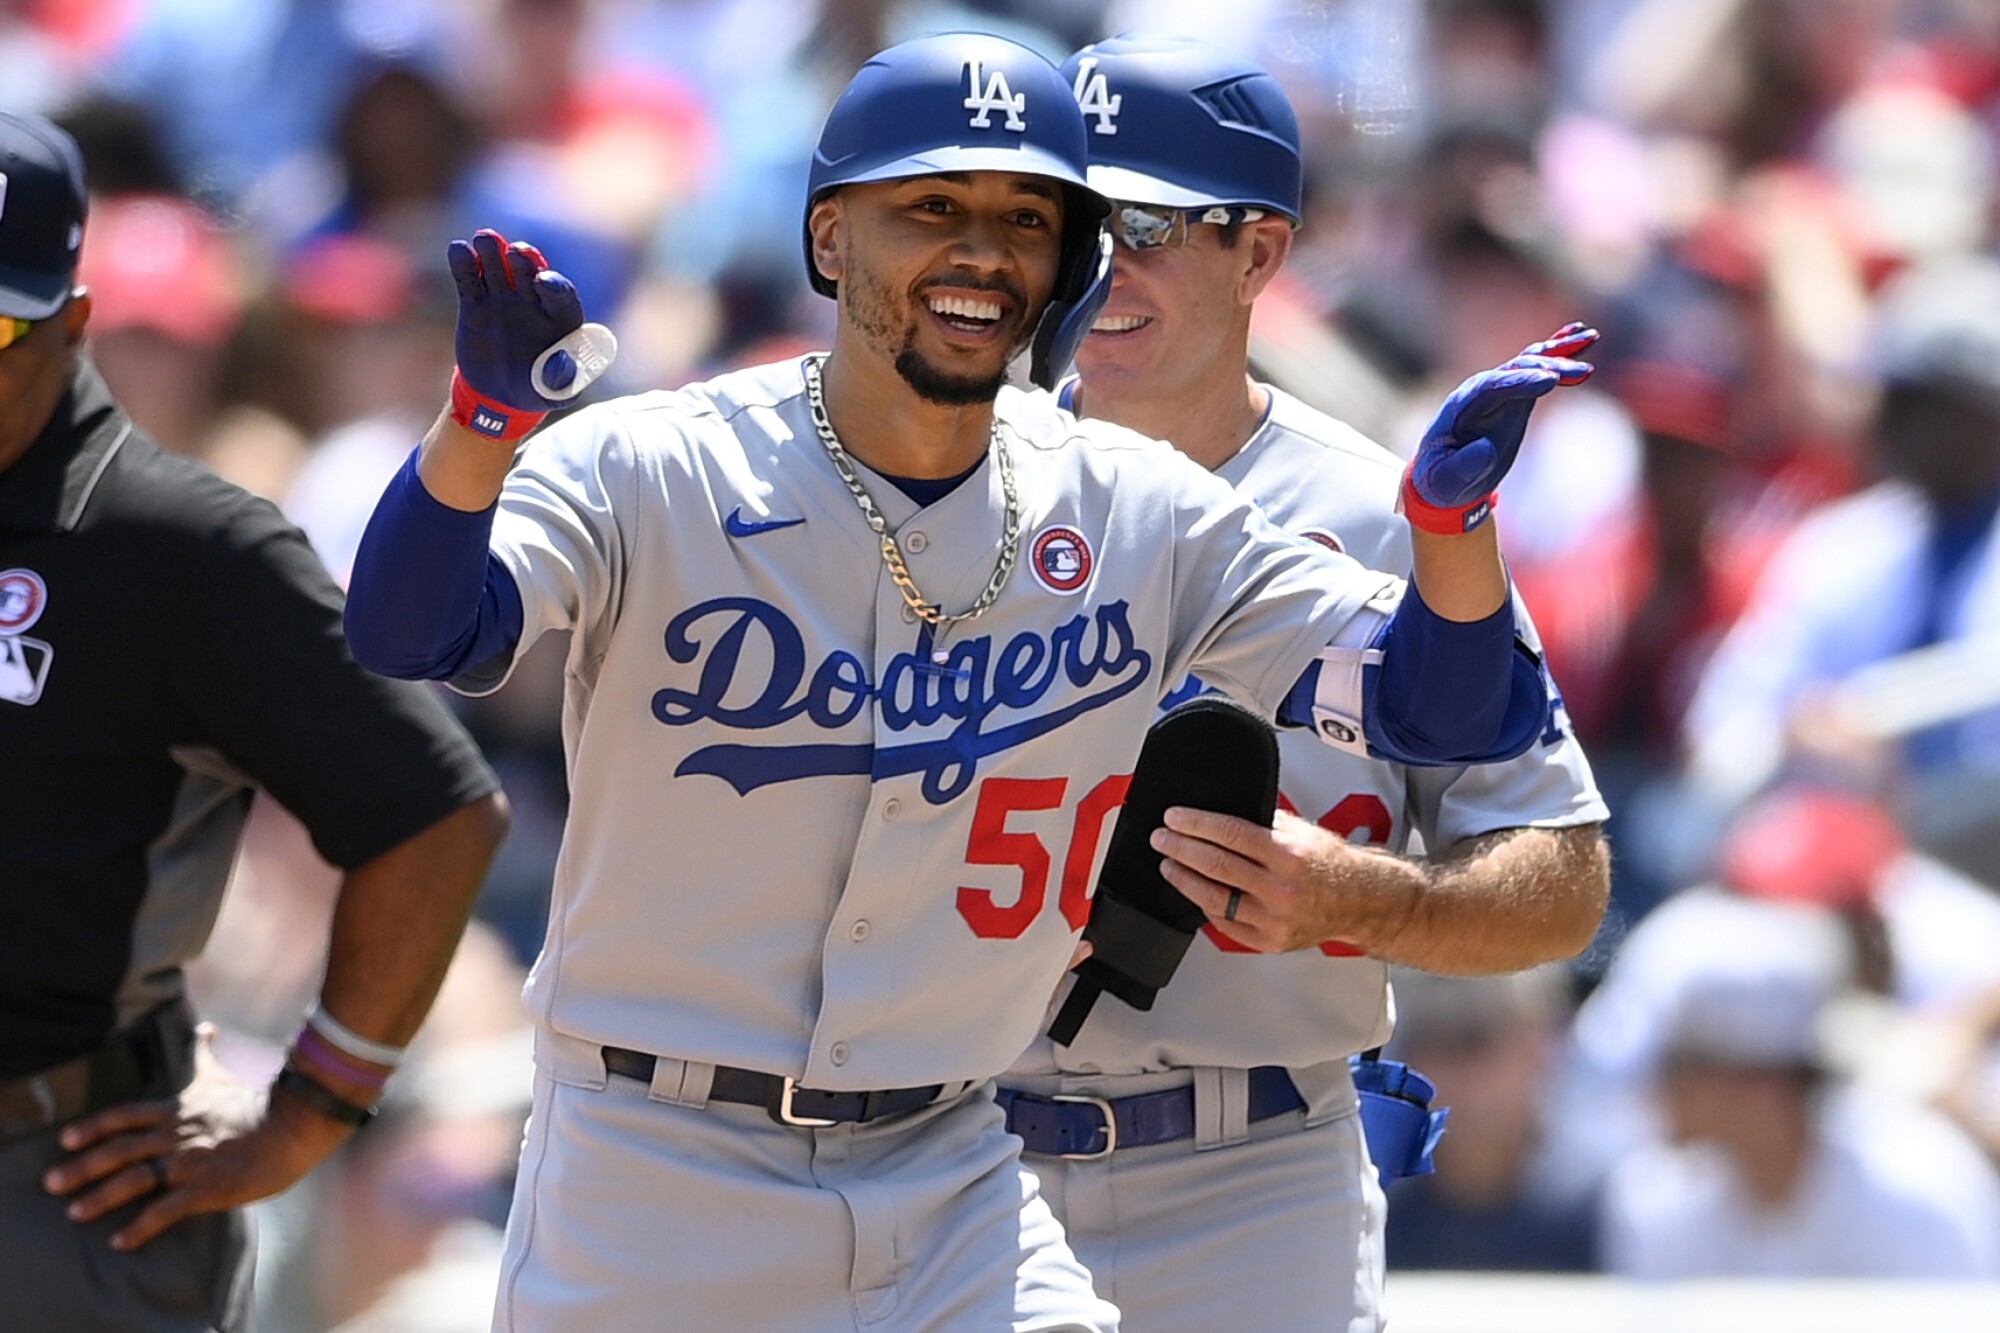 Mookie Betts reacts after he hitting a single during the Dodgers' win.